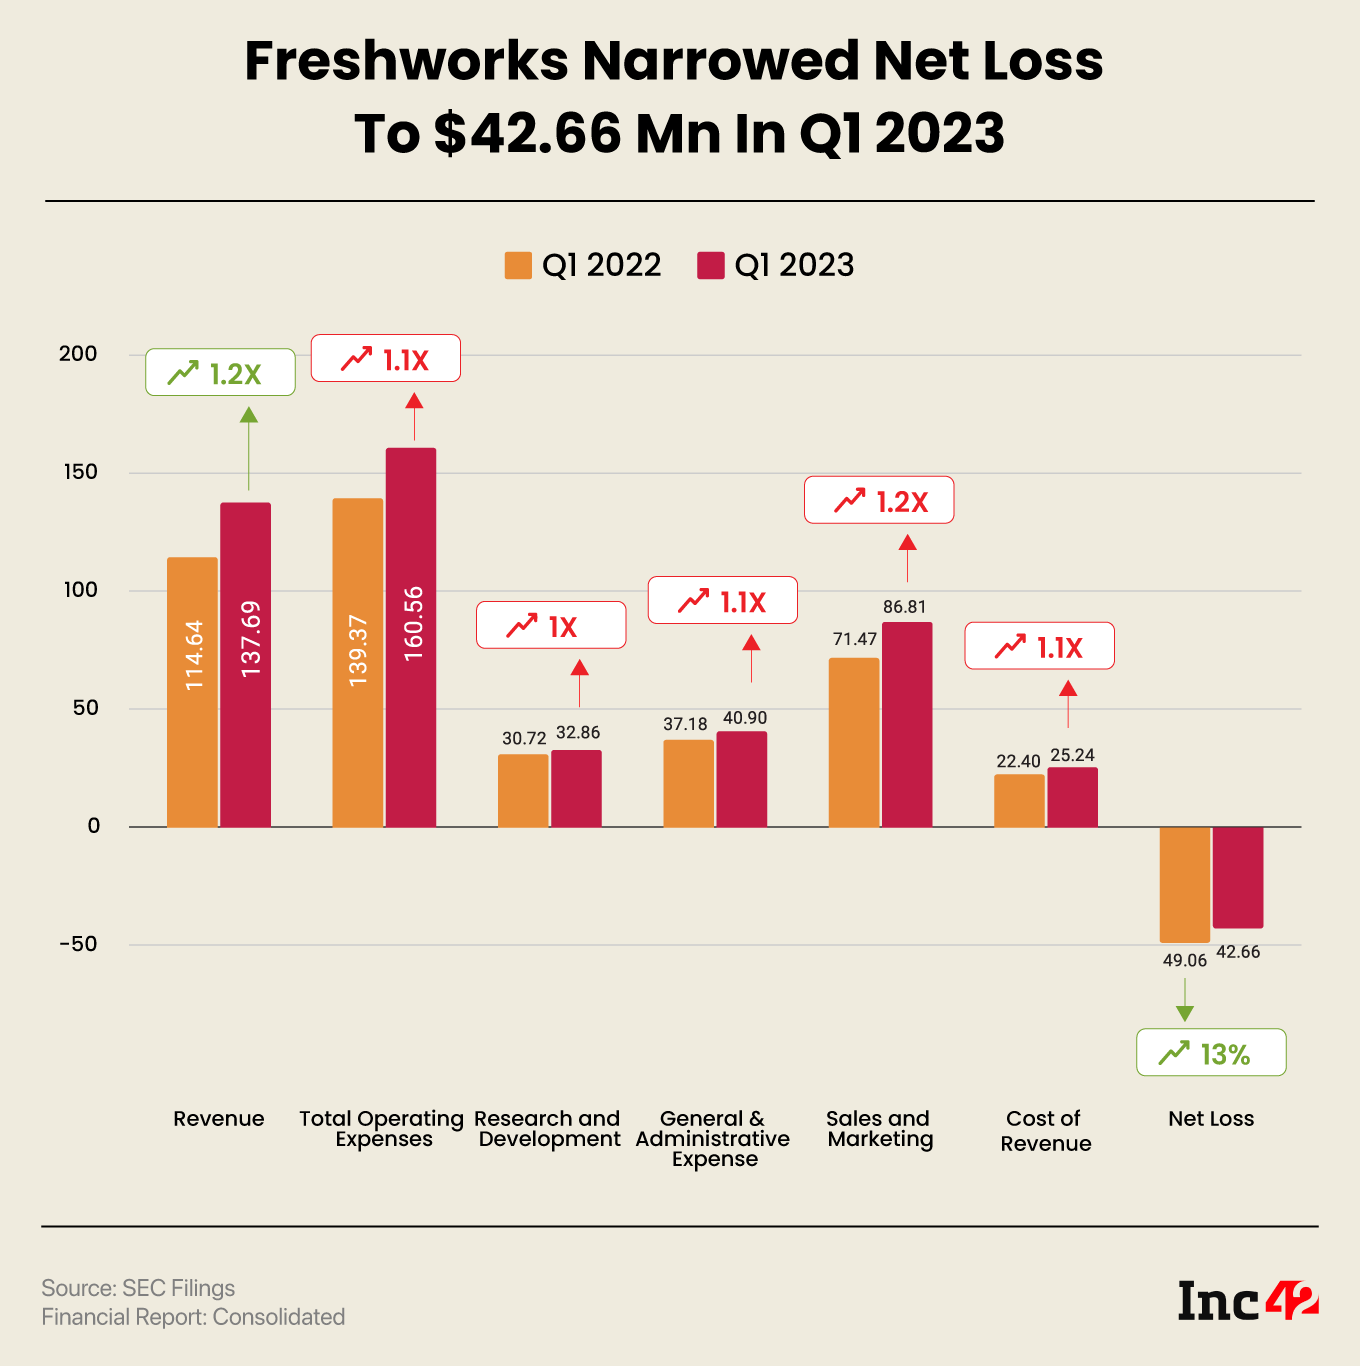 Freshworks narrowed net loss to $42.66 Mn in Q1 2023